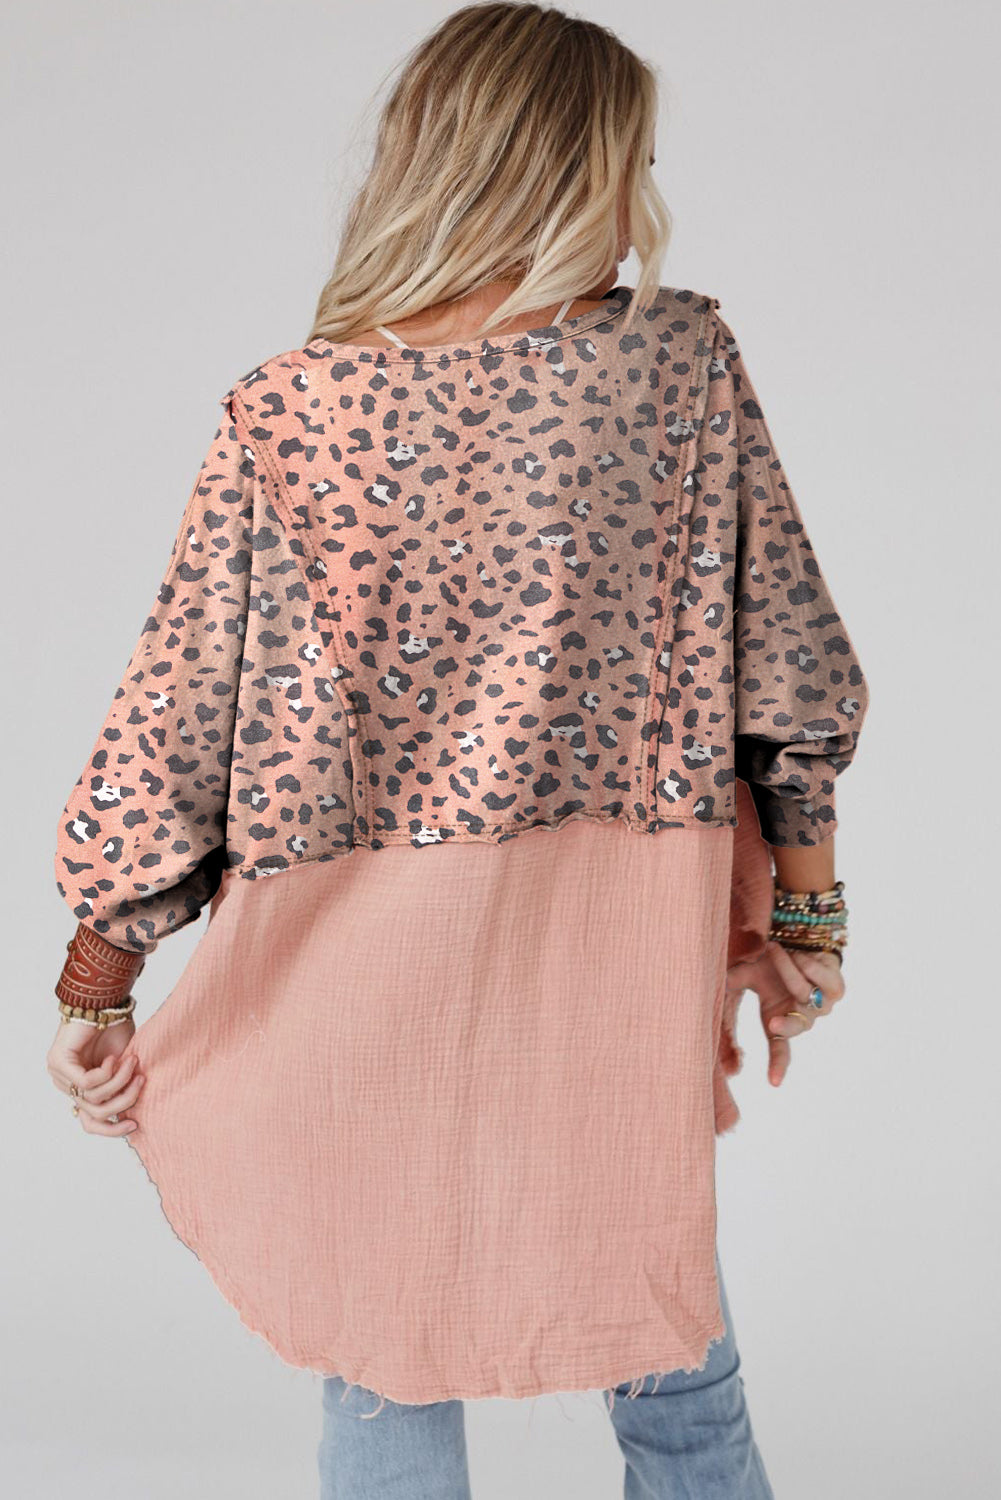 Textured Leopard Dropped Shoulder Blouse - Women’s Clothing & Accessories - Shirts & Tops - 2 - 2024